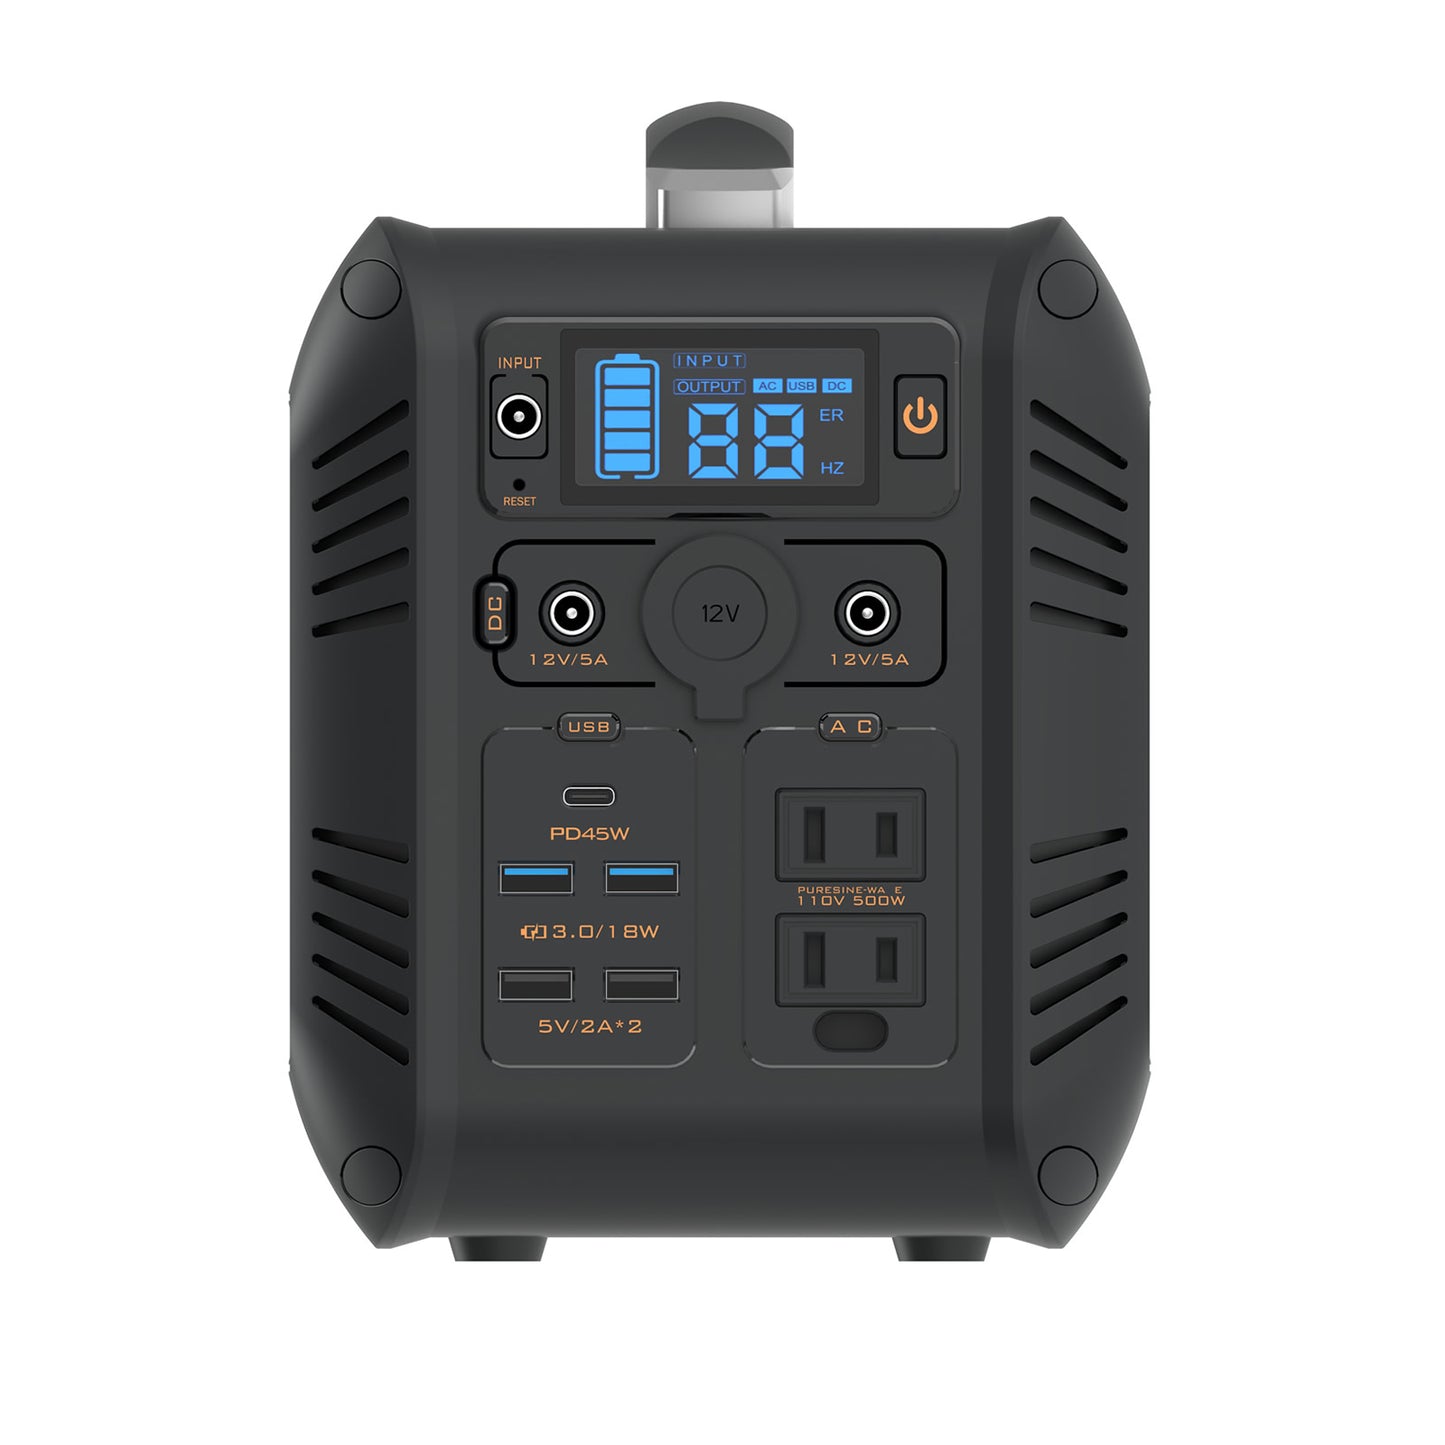 FFpower CN505 Portable Power Station 500Wh